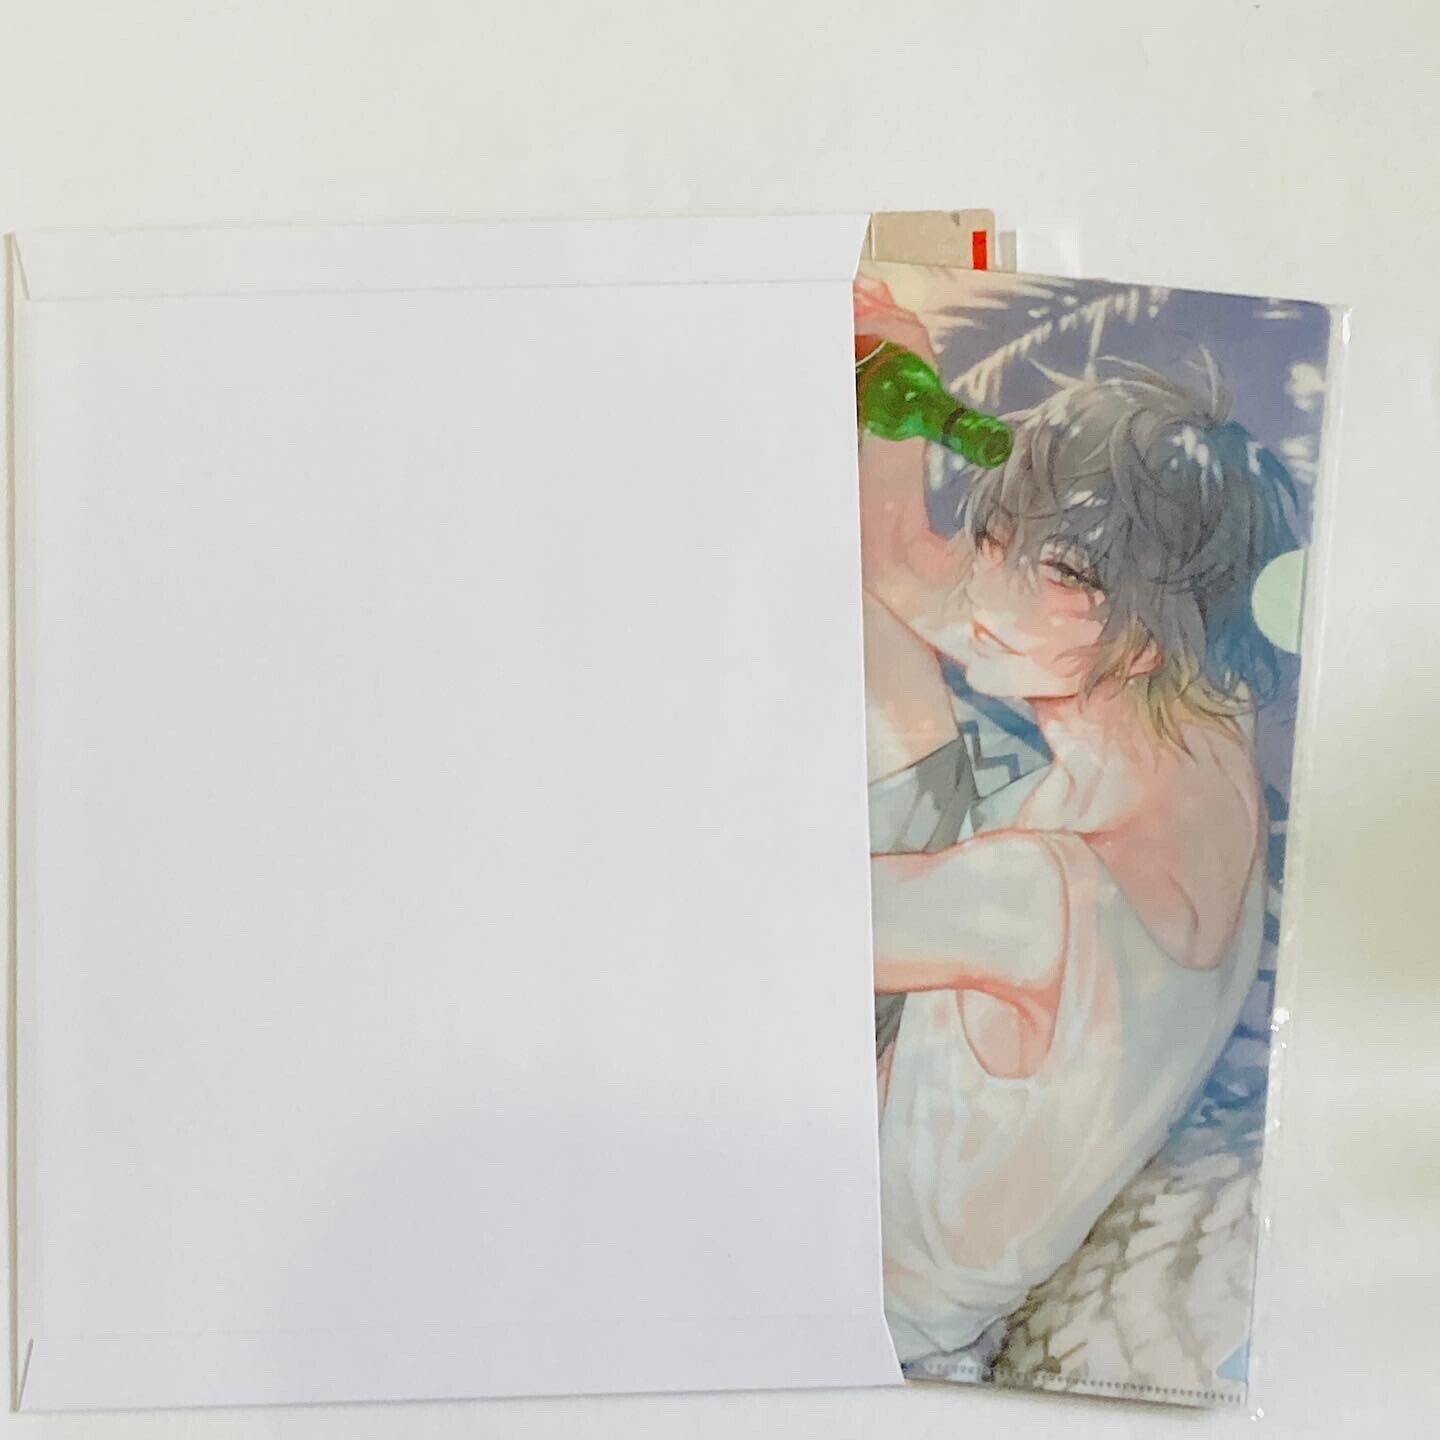 Auth Official Works Slow Damage Nitro + CHiRAL Clear File 4 Set Towa